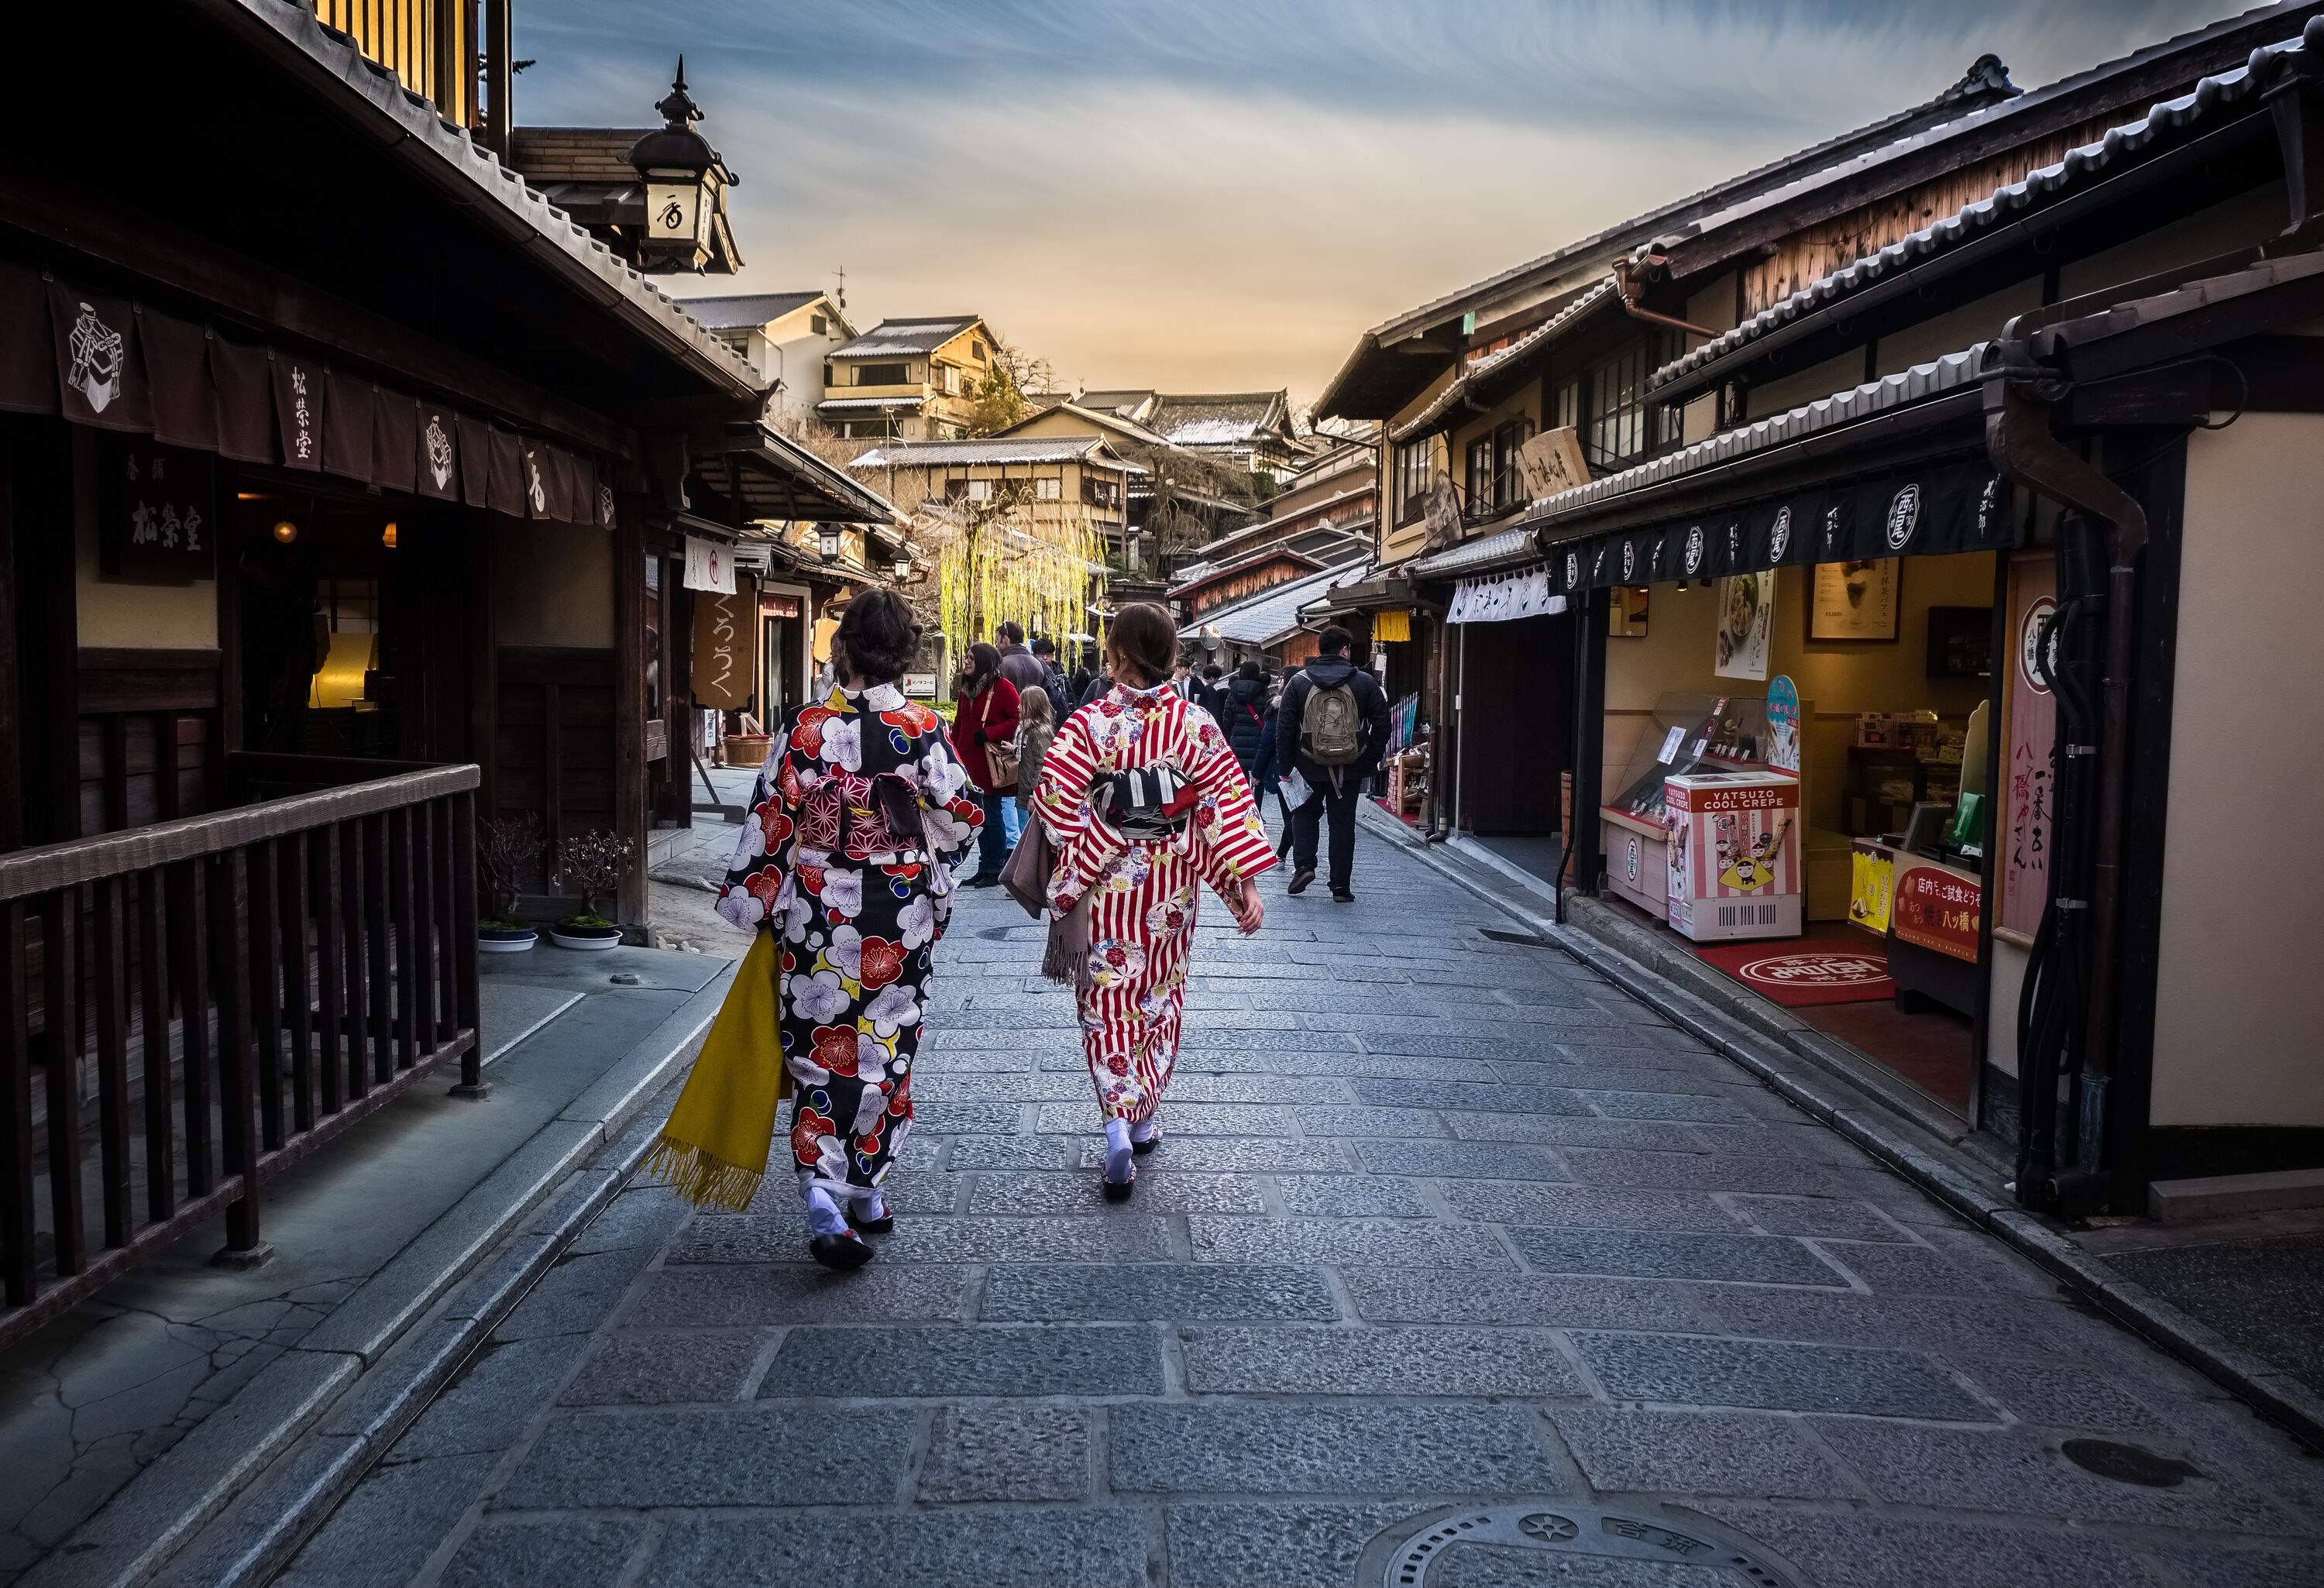 Two ladies in colourful floral kimonos walking in a busy street in the middle of houses.